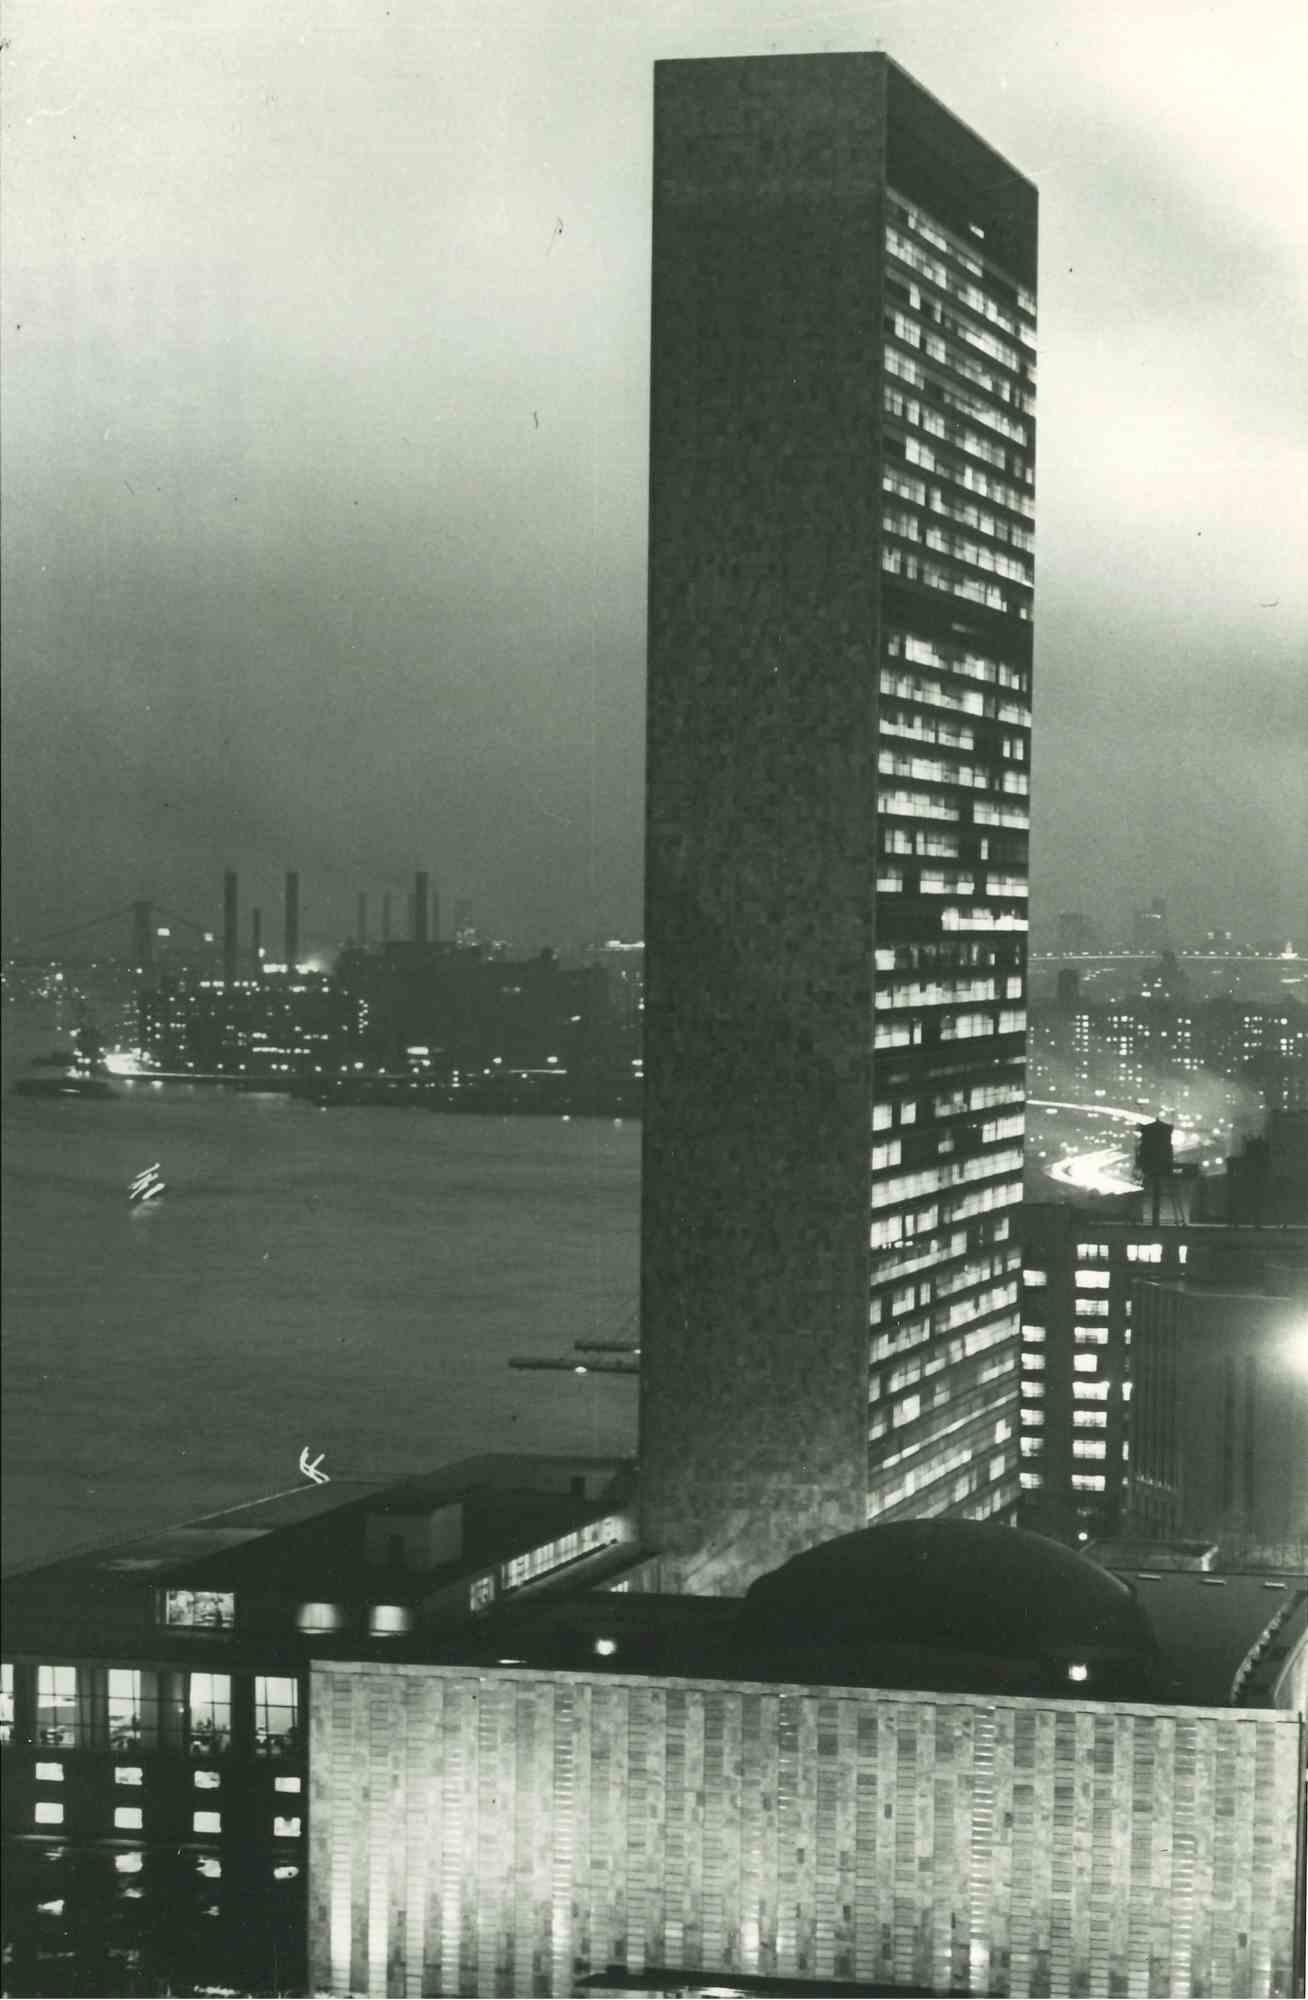 Unknown Figurative Photograph - Night View - Vintage Photograph - Mid 20th Century